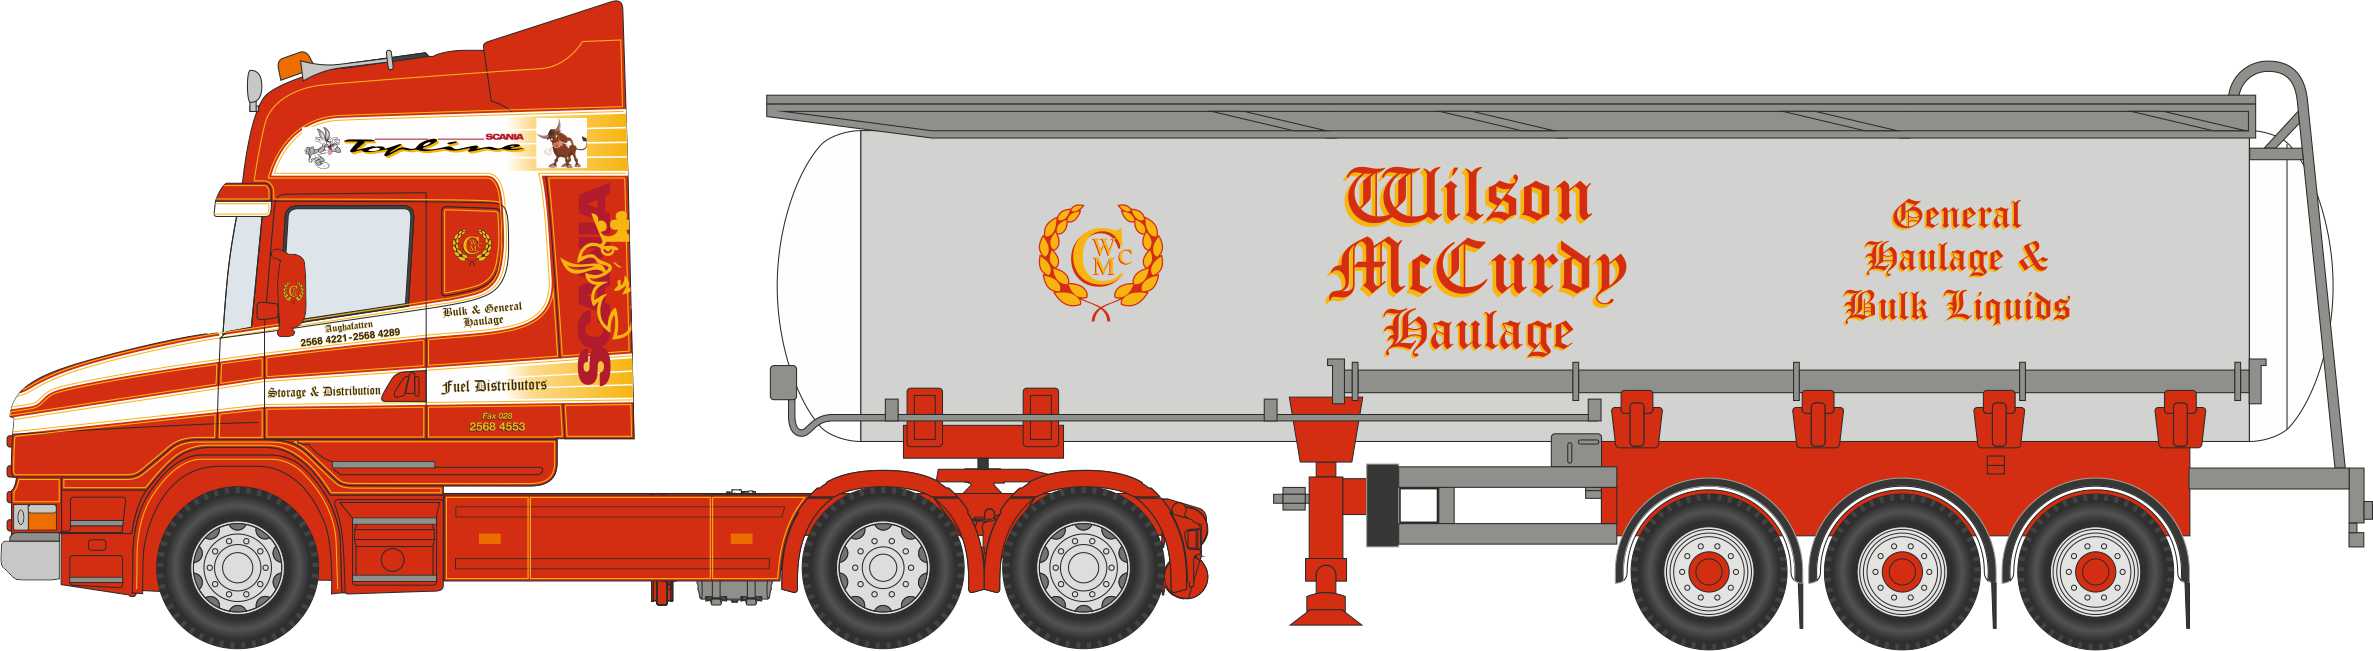 Oxford Diecast Scania T Cab Cylindrical Tanker Wilson Mccurdy 1:76 Line Drawing